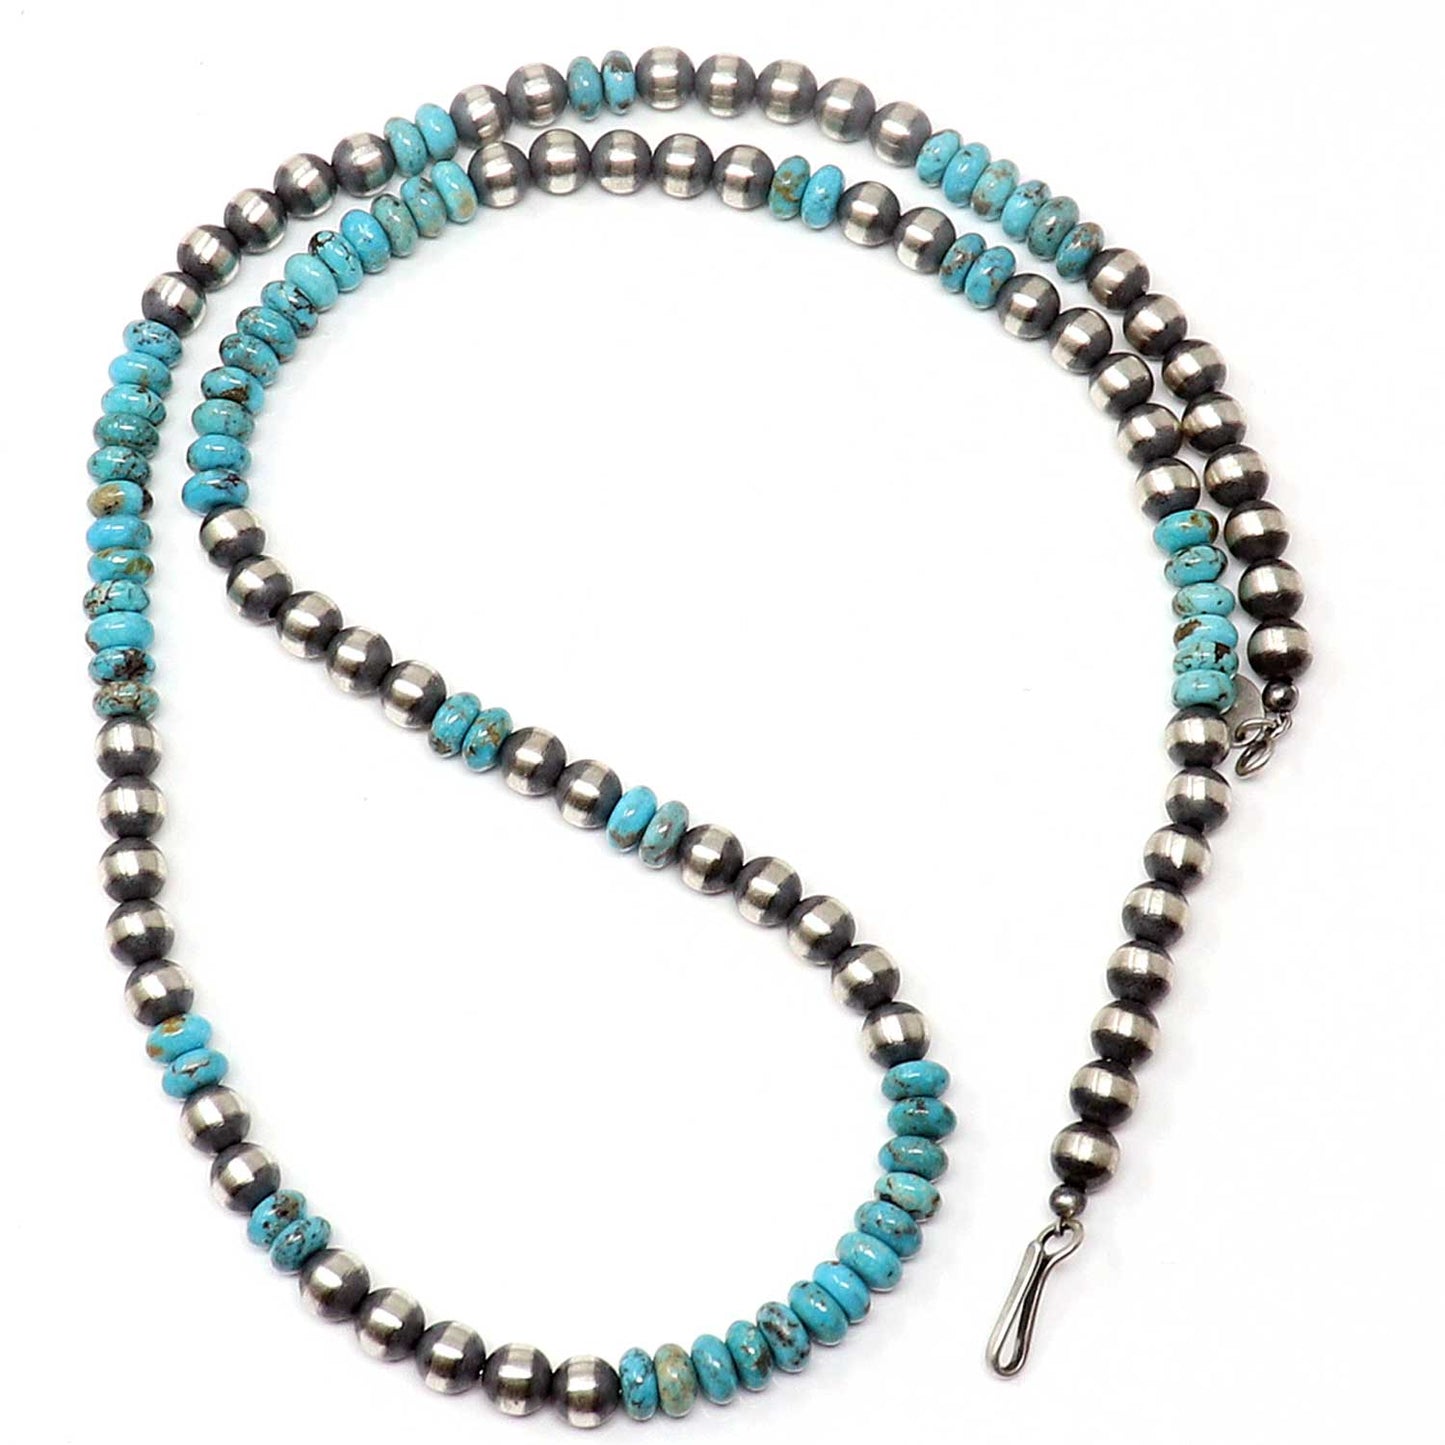 24" 6 mm Sterling Silver Pearls With Turquoise Accents